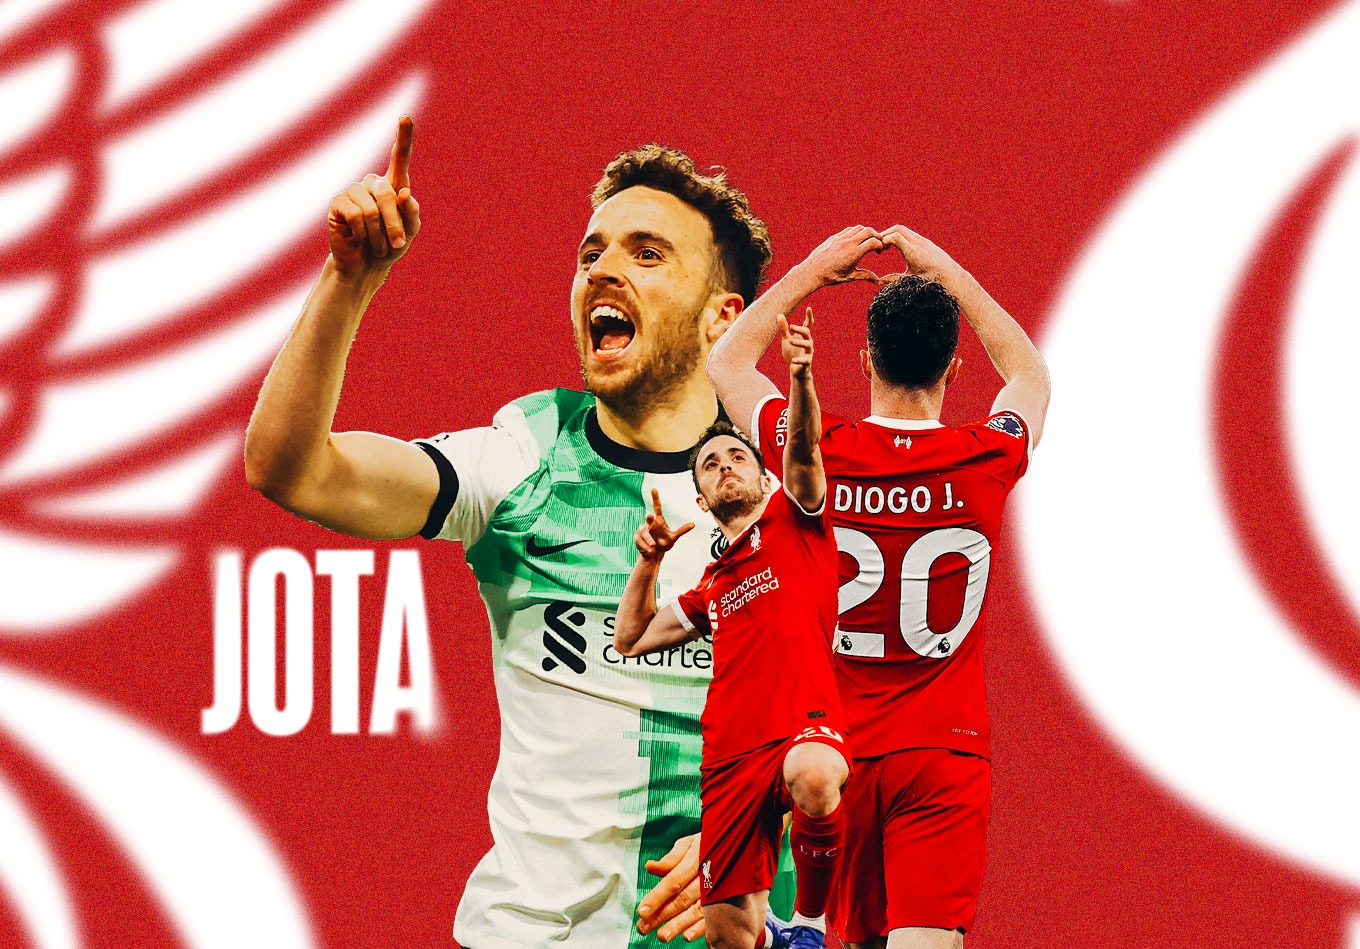 Is Ruthless Diogo Jota Liverpool’s Most Clinical Forward?